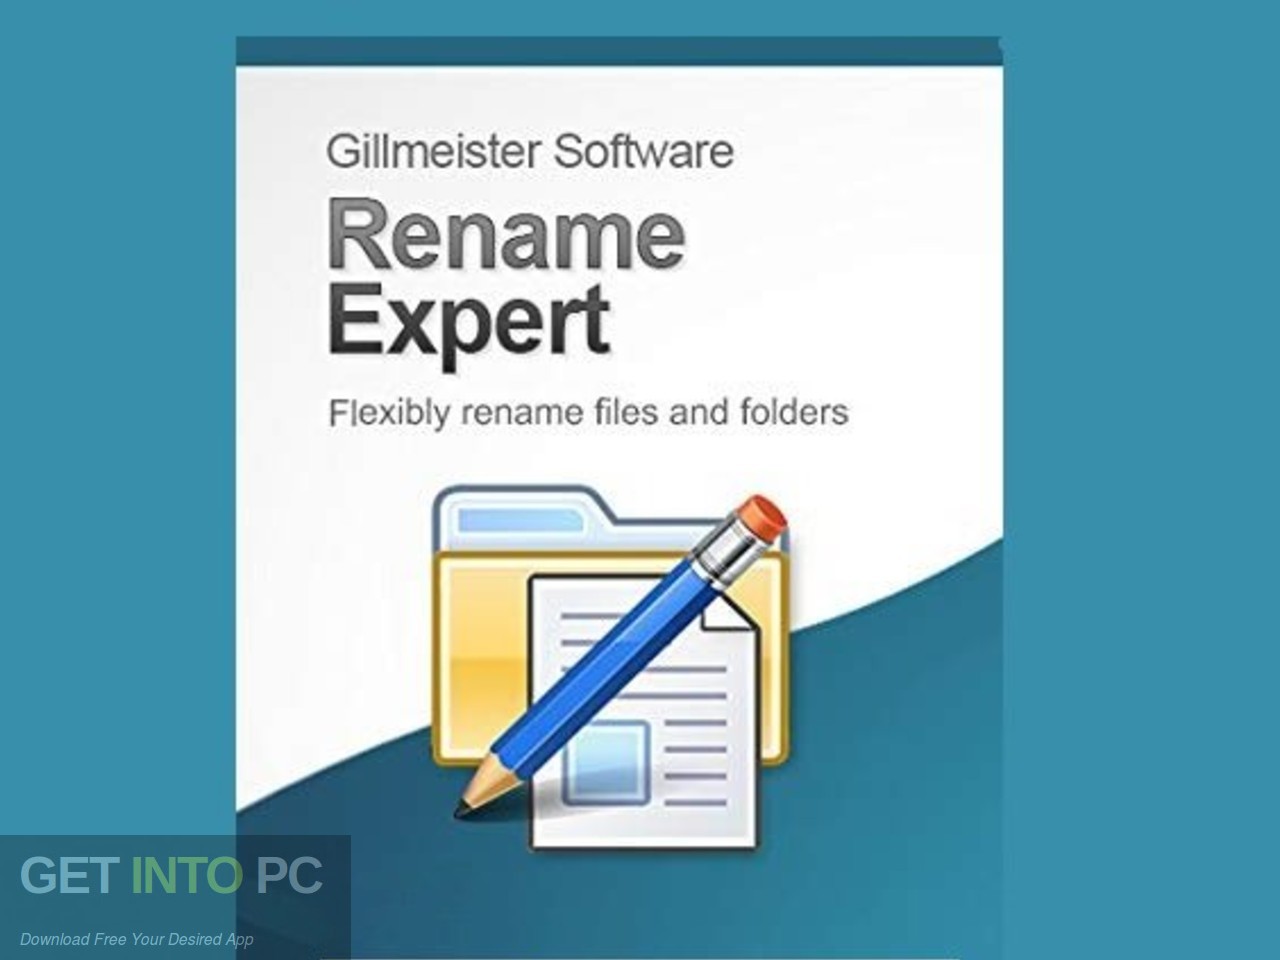 Gillmeister Rename Expert Free Download